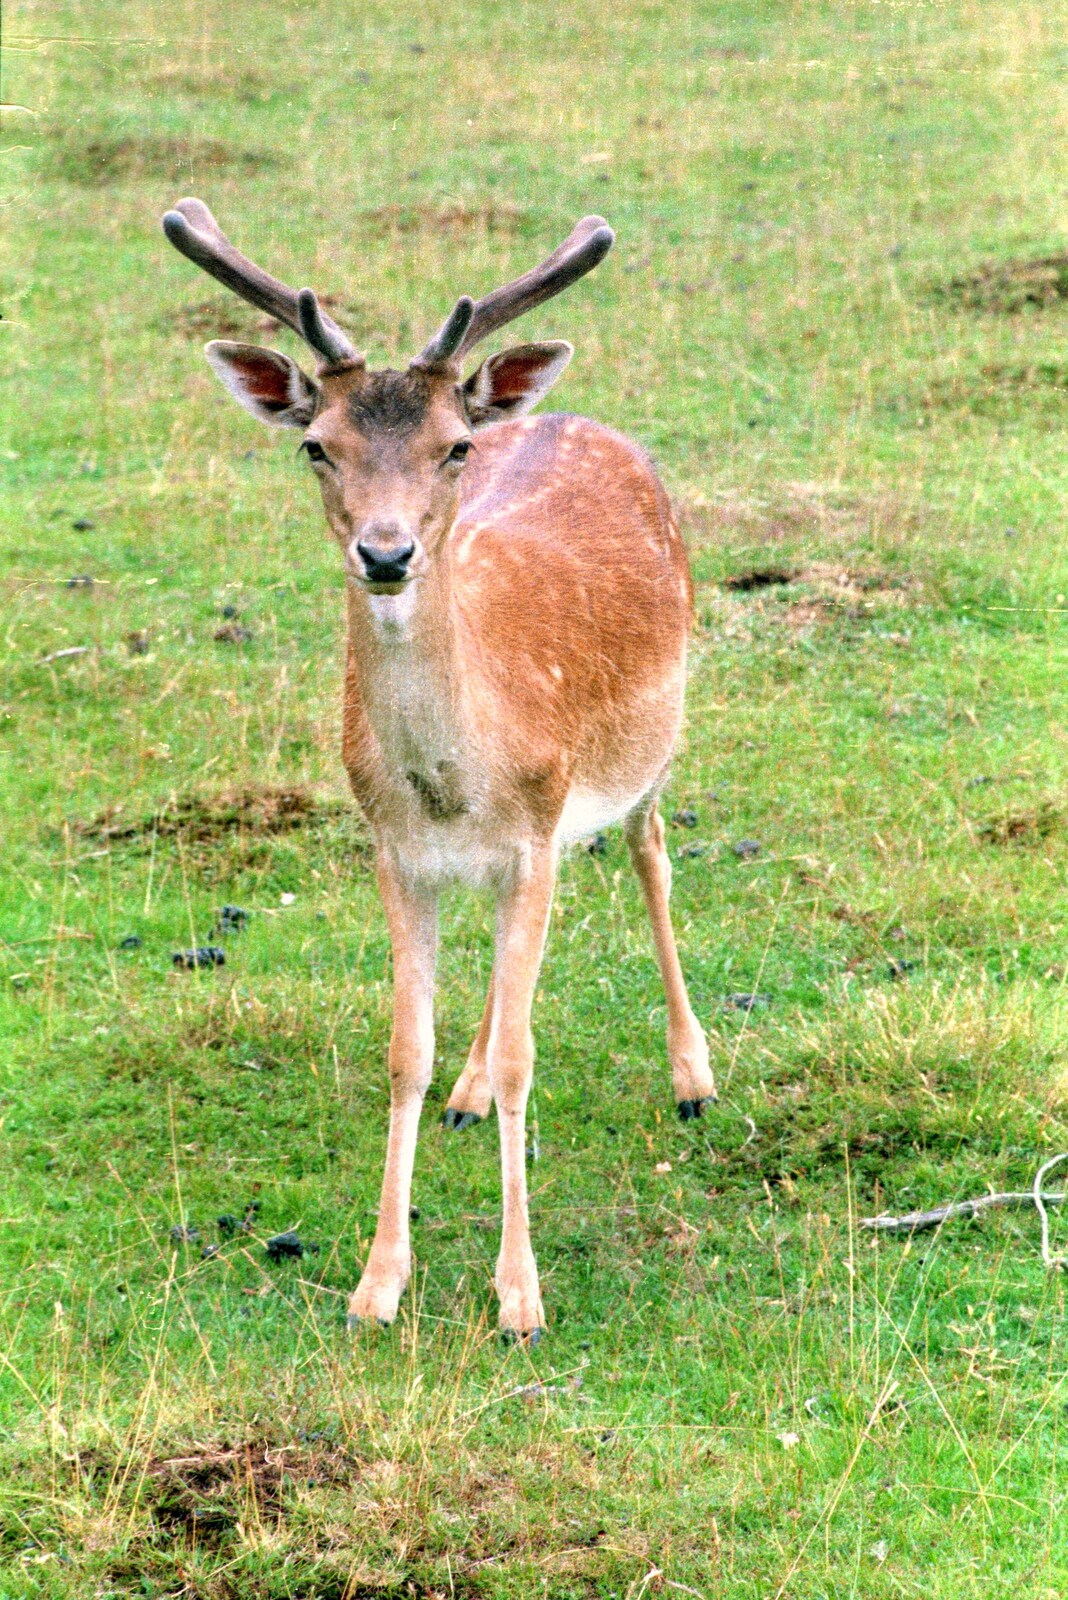 A curious deer from A Trip to Groombridge, Kent - 10th July 1986